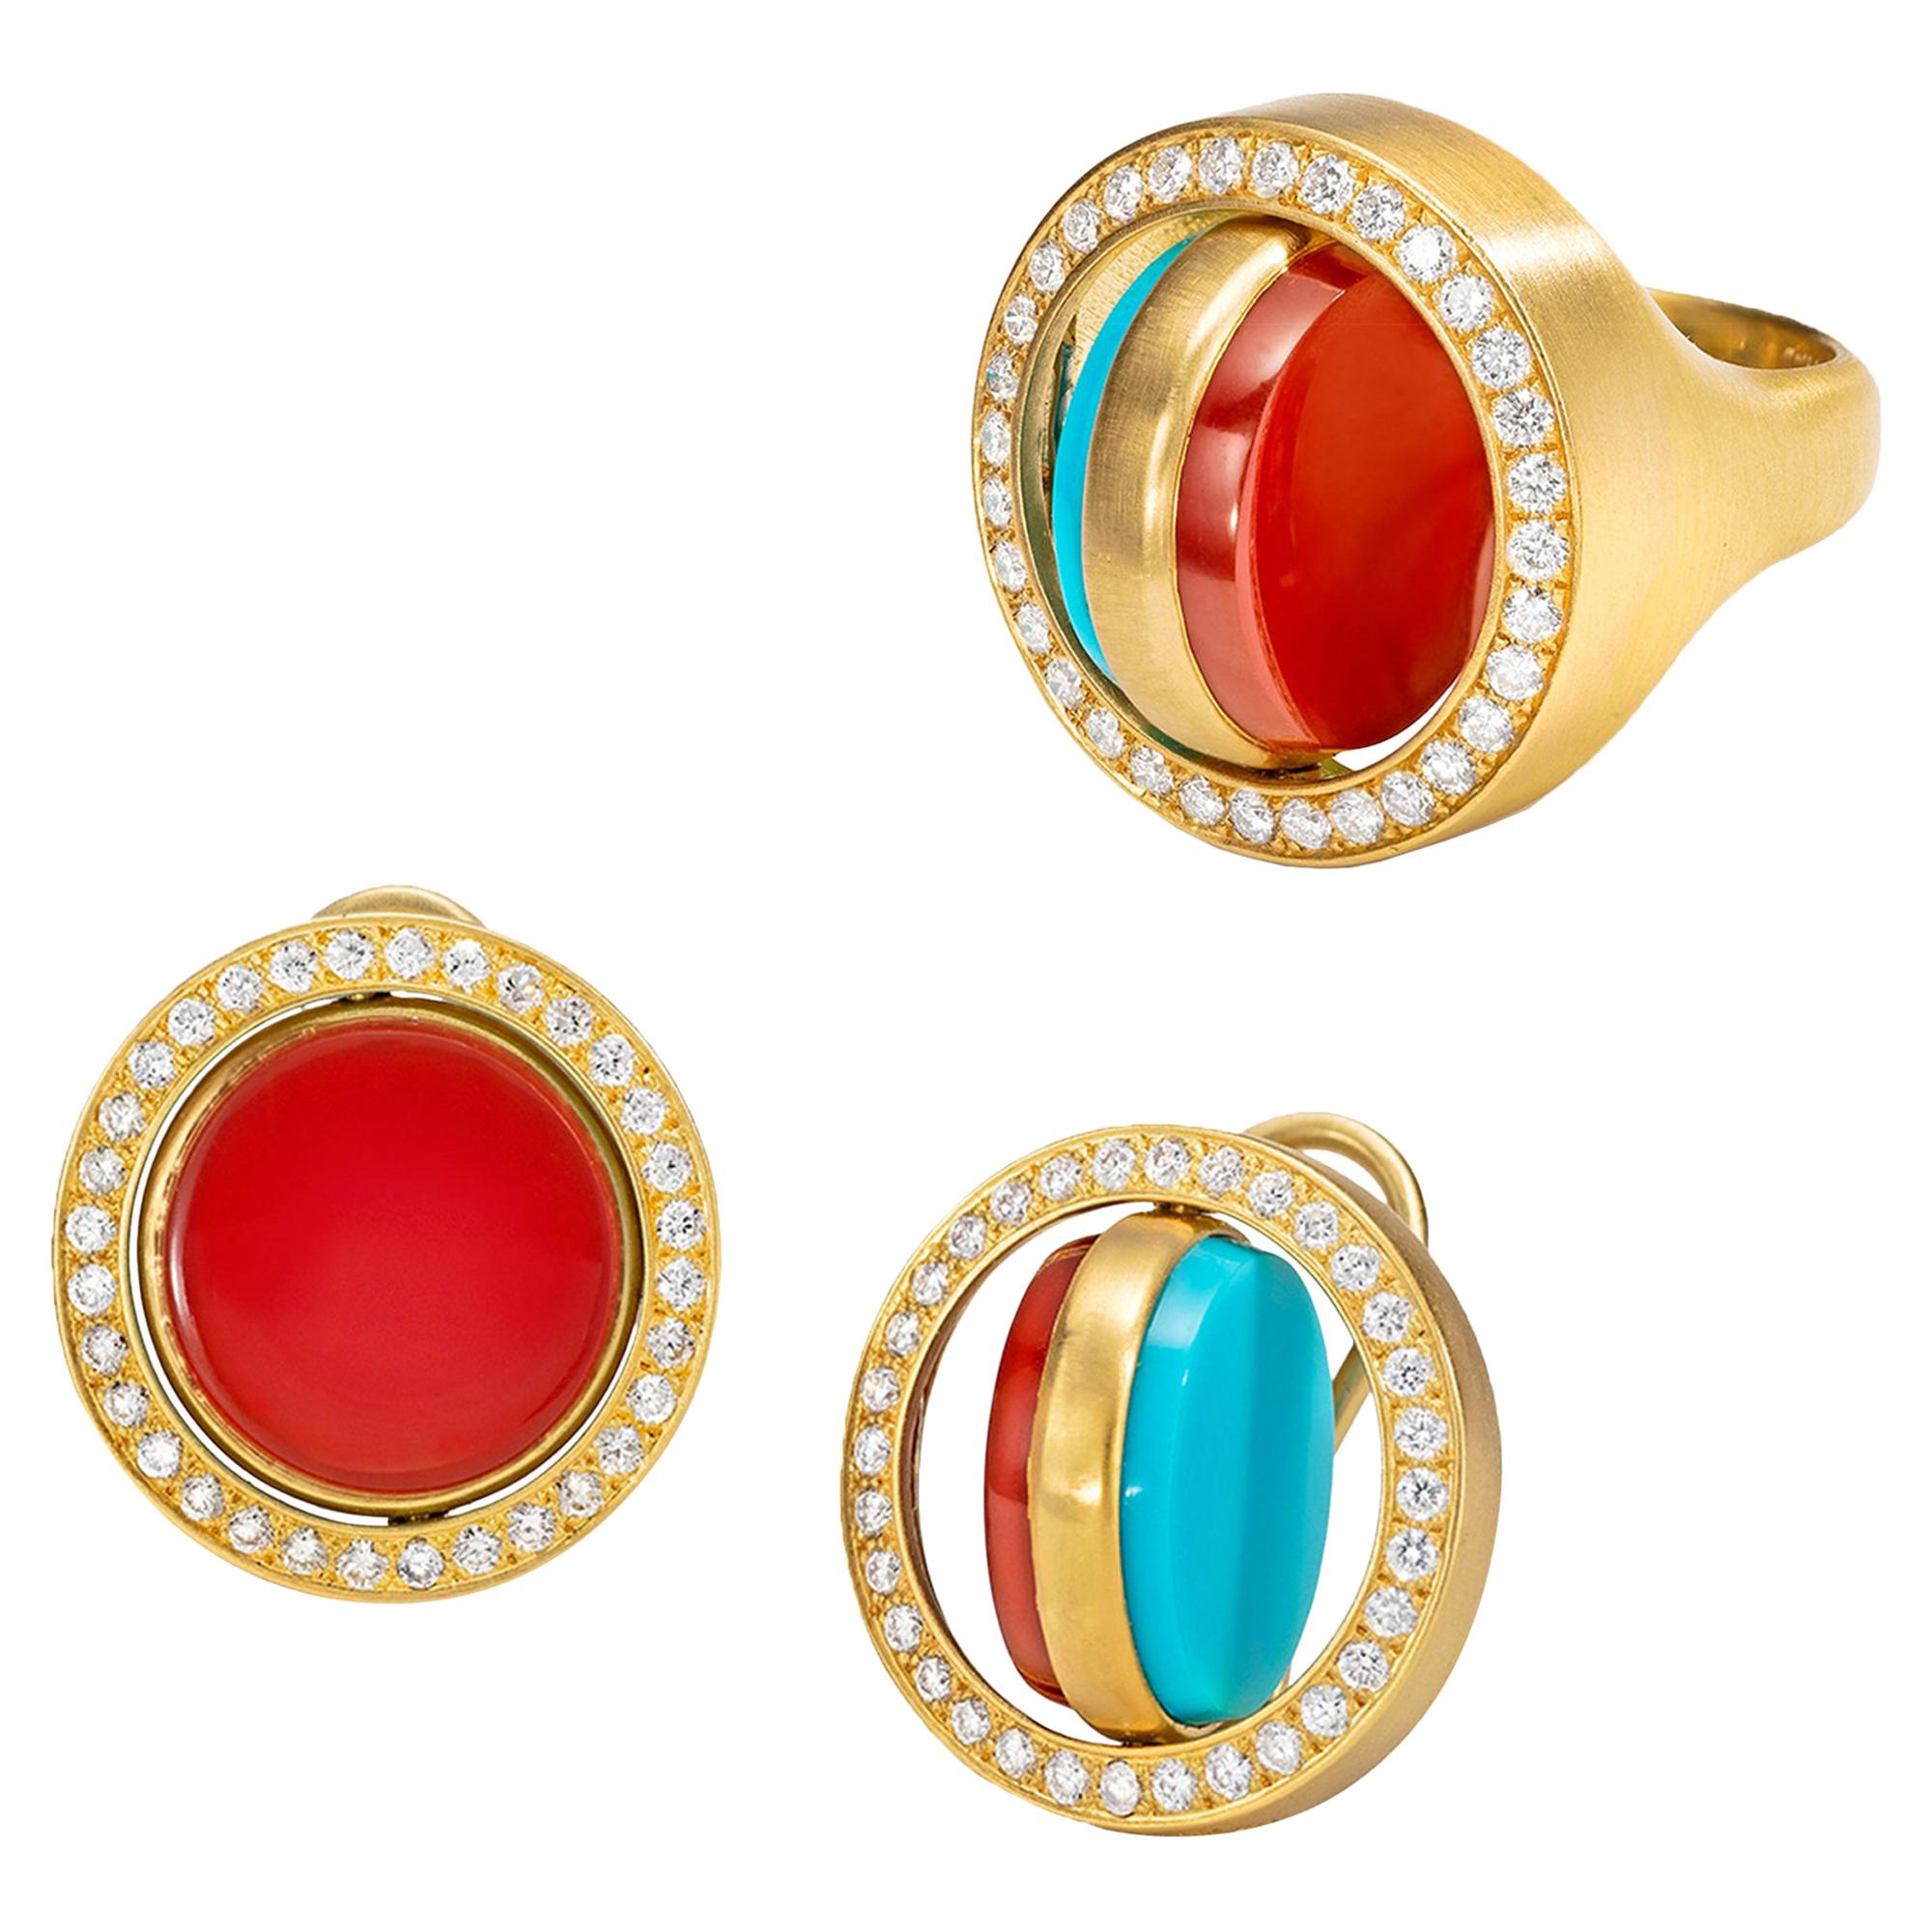 Wendy Brandes 2-in-1 Turquoise and Carnelian Flip Ring, Earrings 18K Gold Set